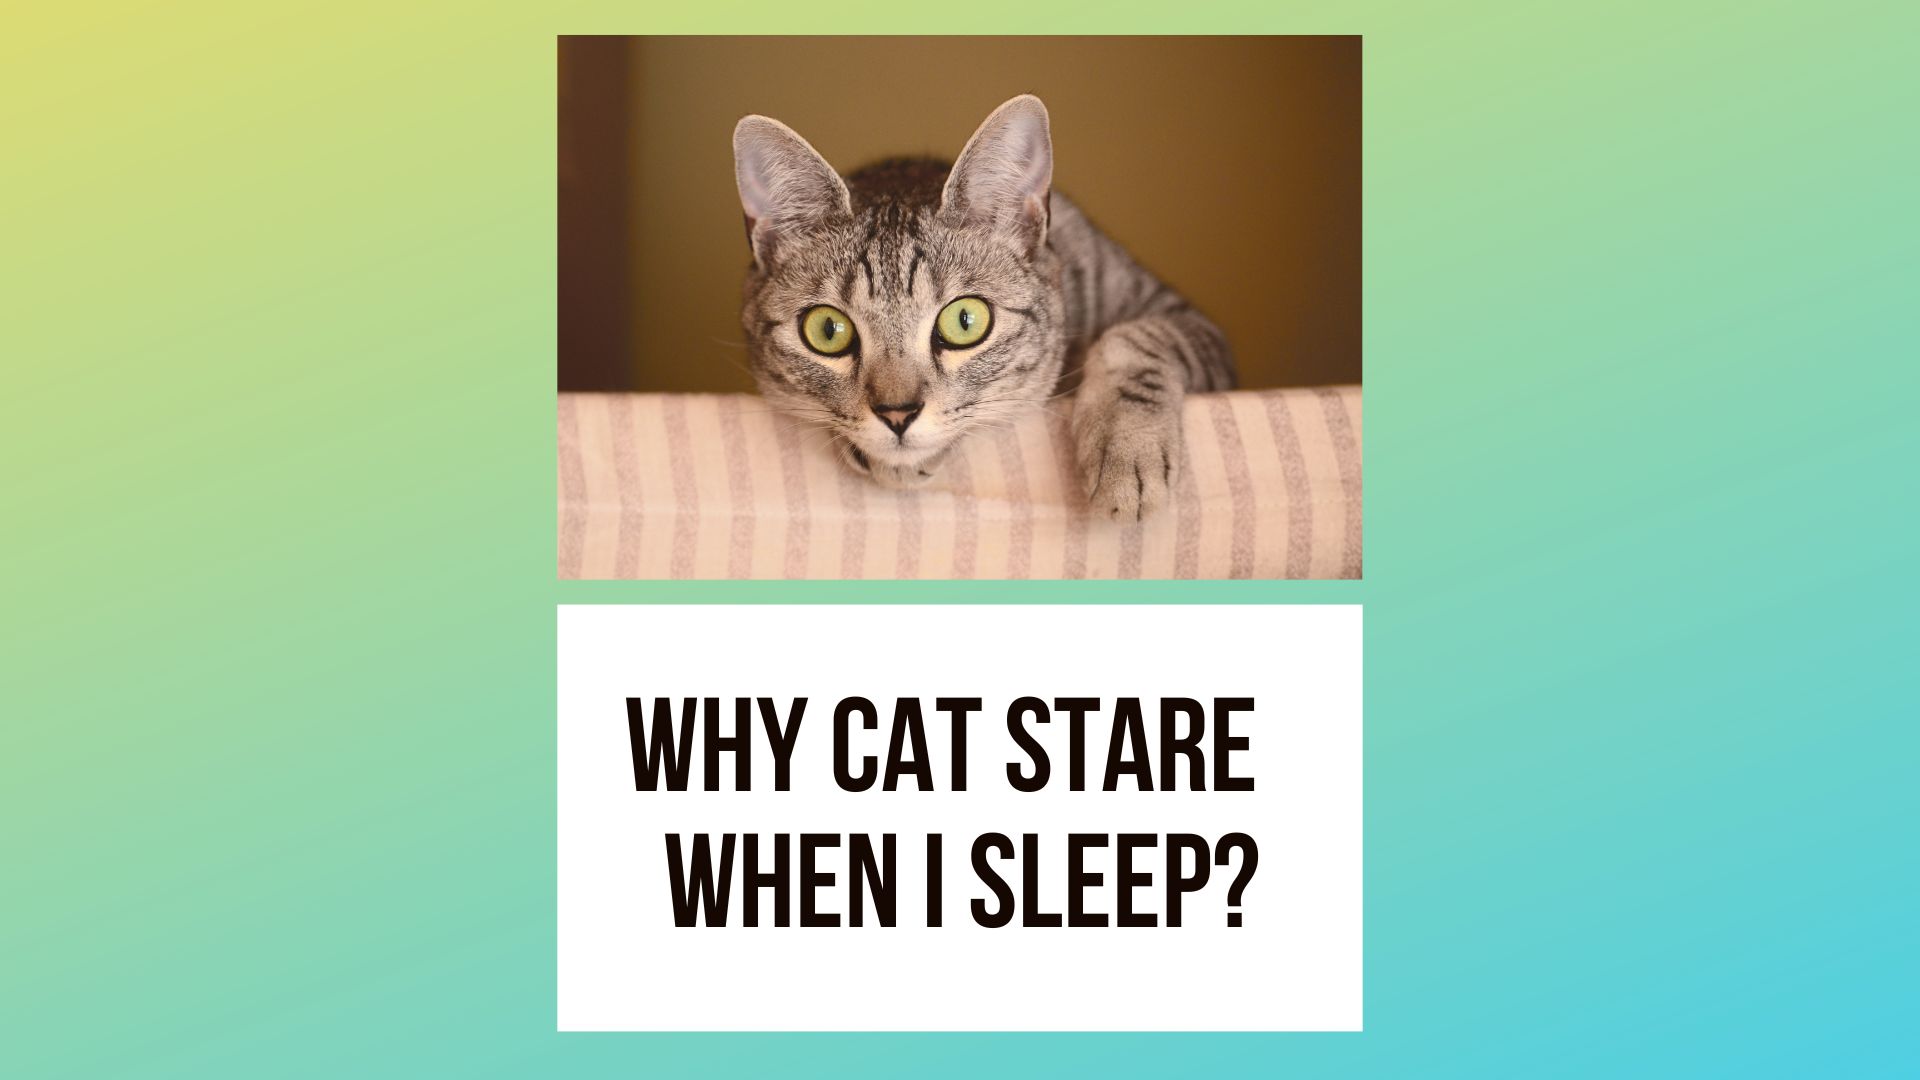 Why Does Cat Stare at Me While I Sleep?